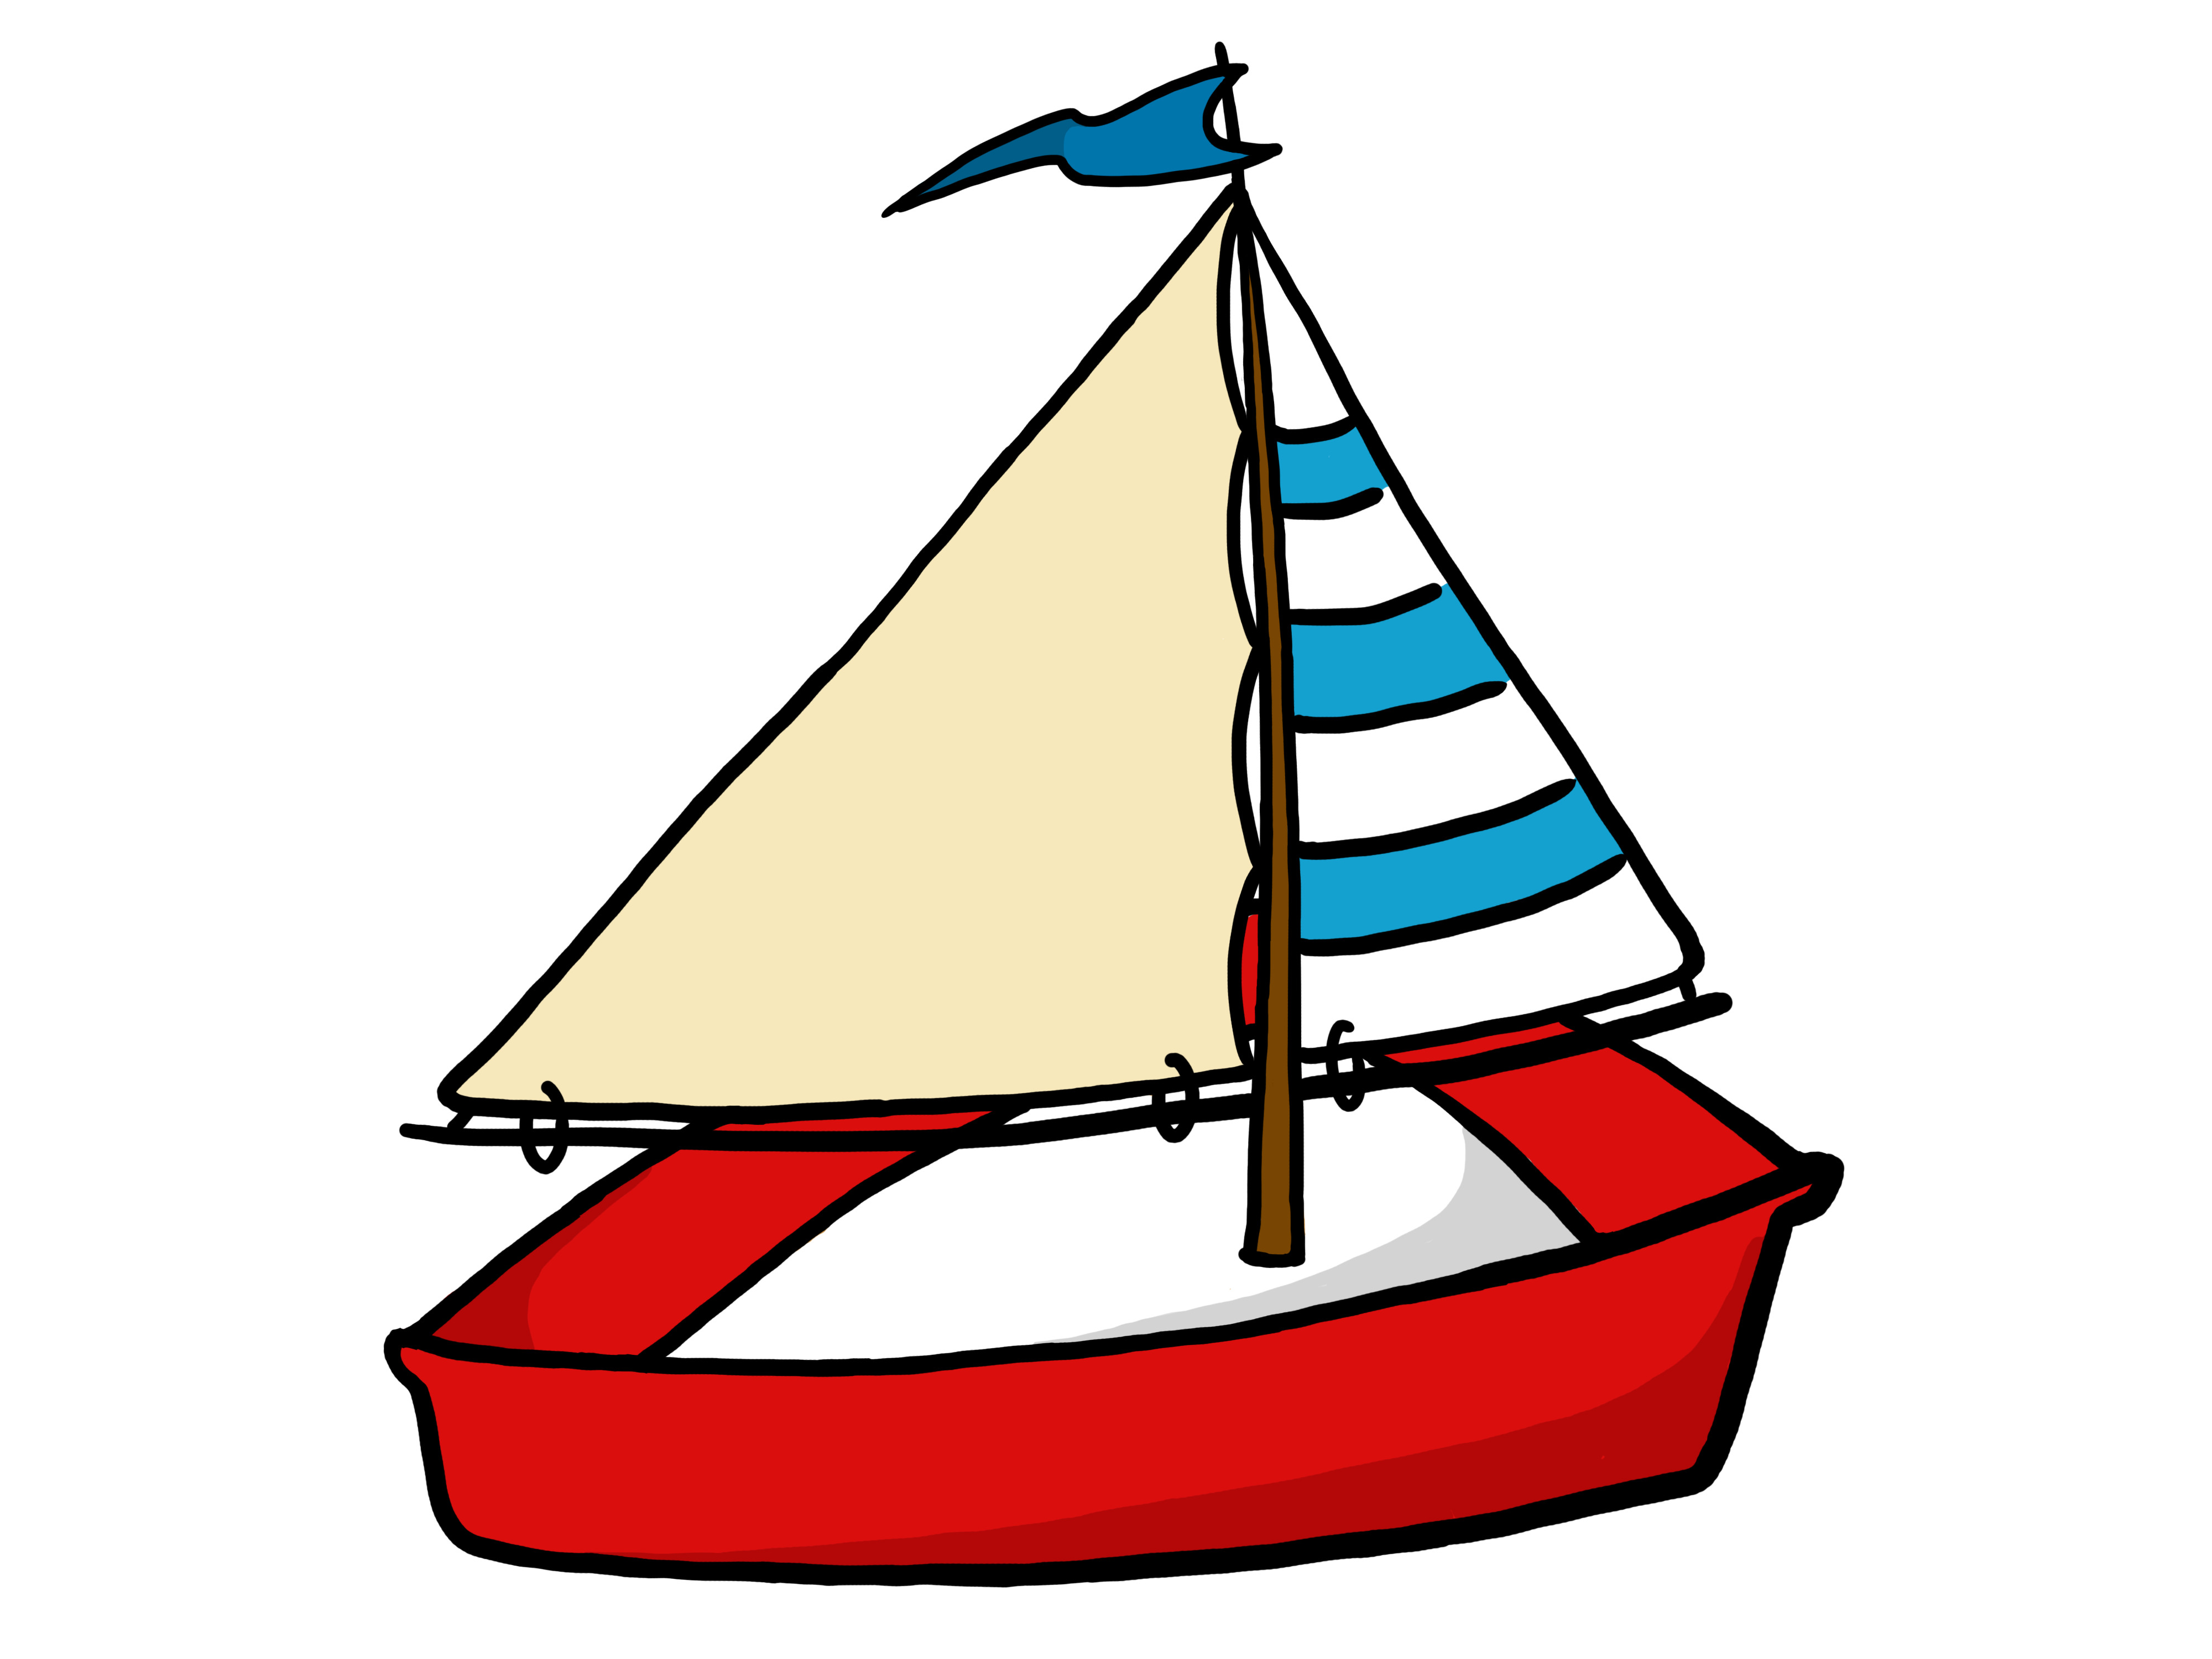 Clipart toys boat. Boating panda free images